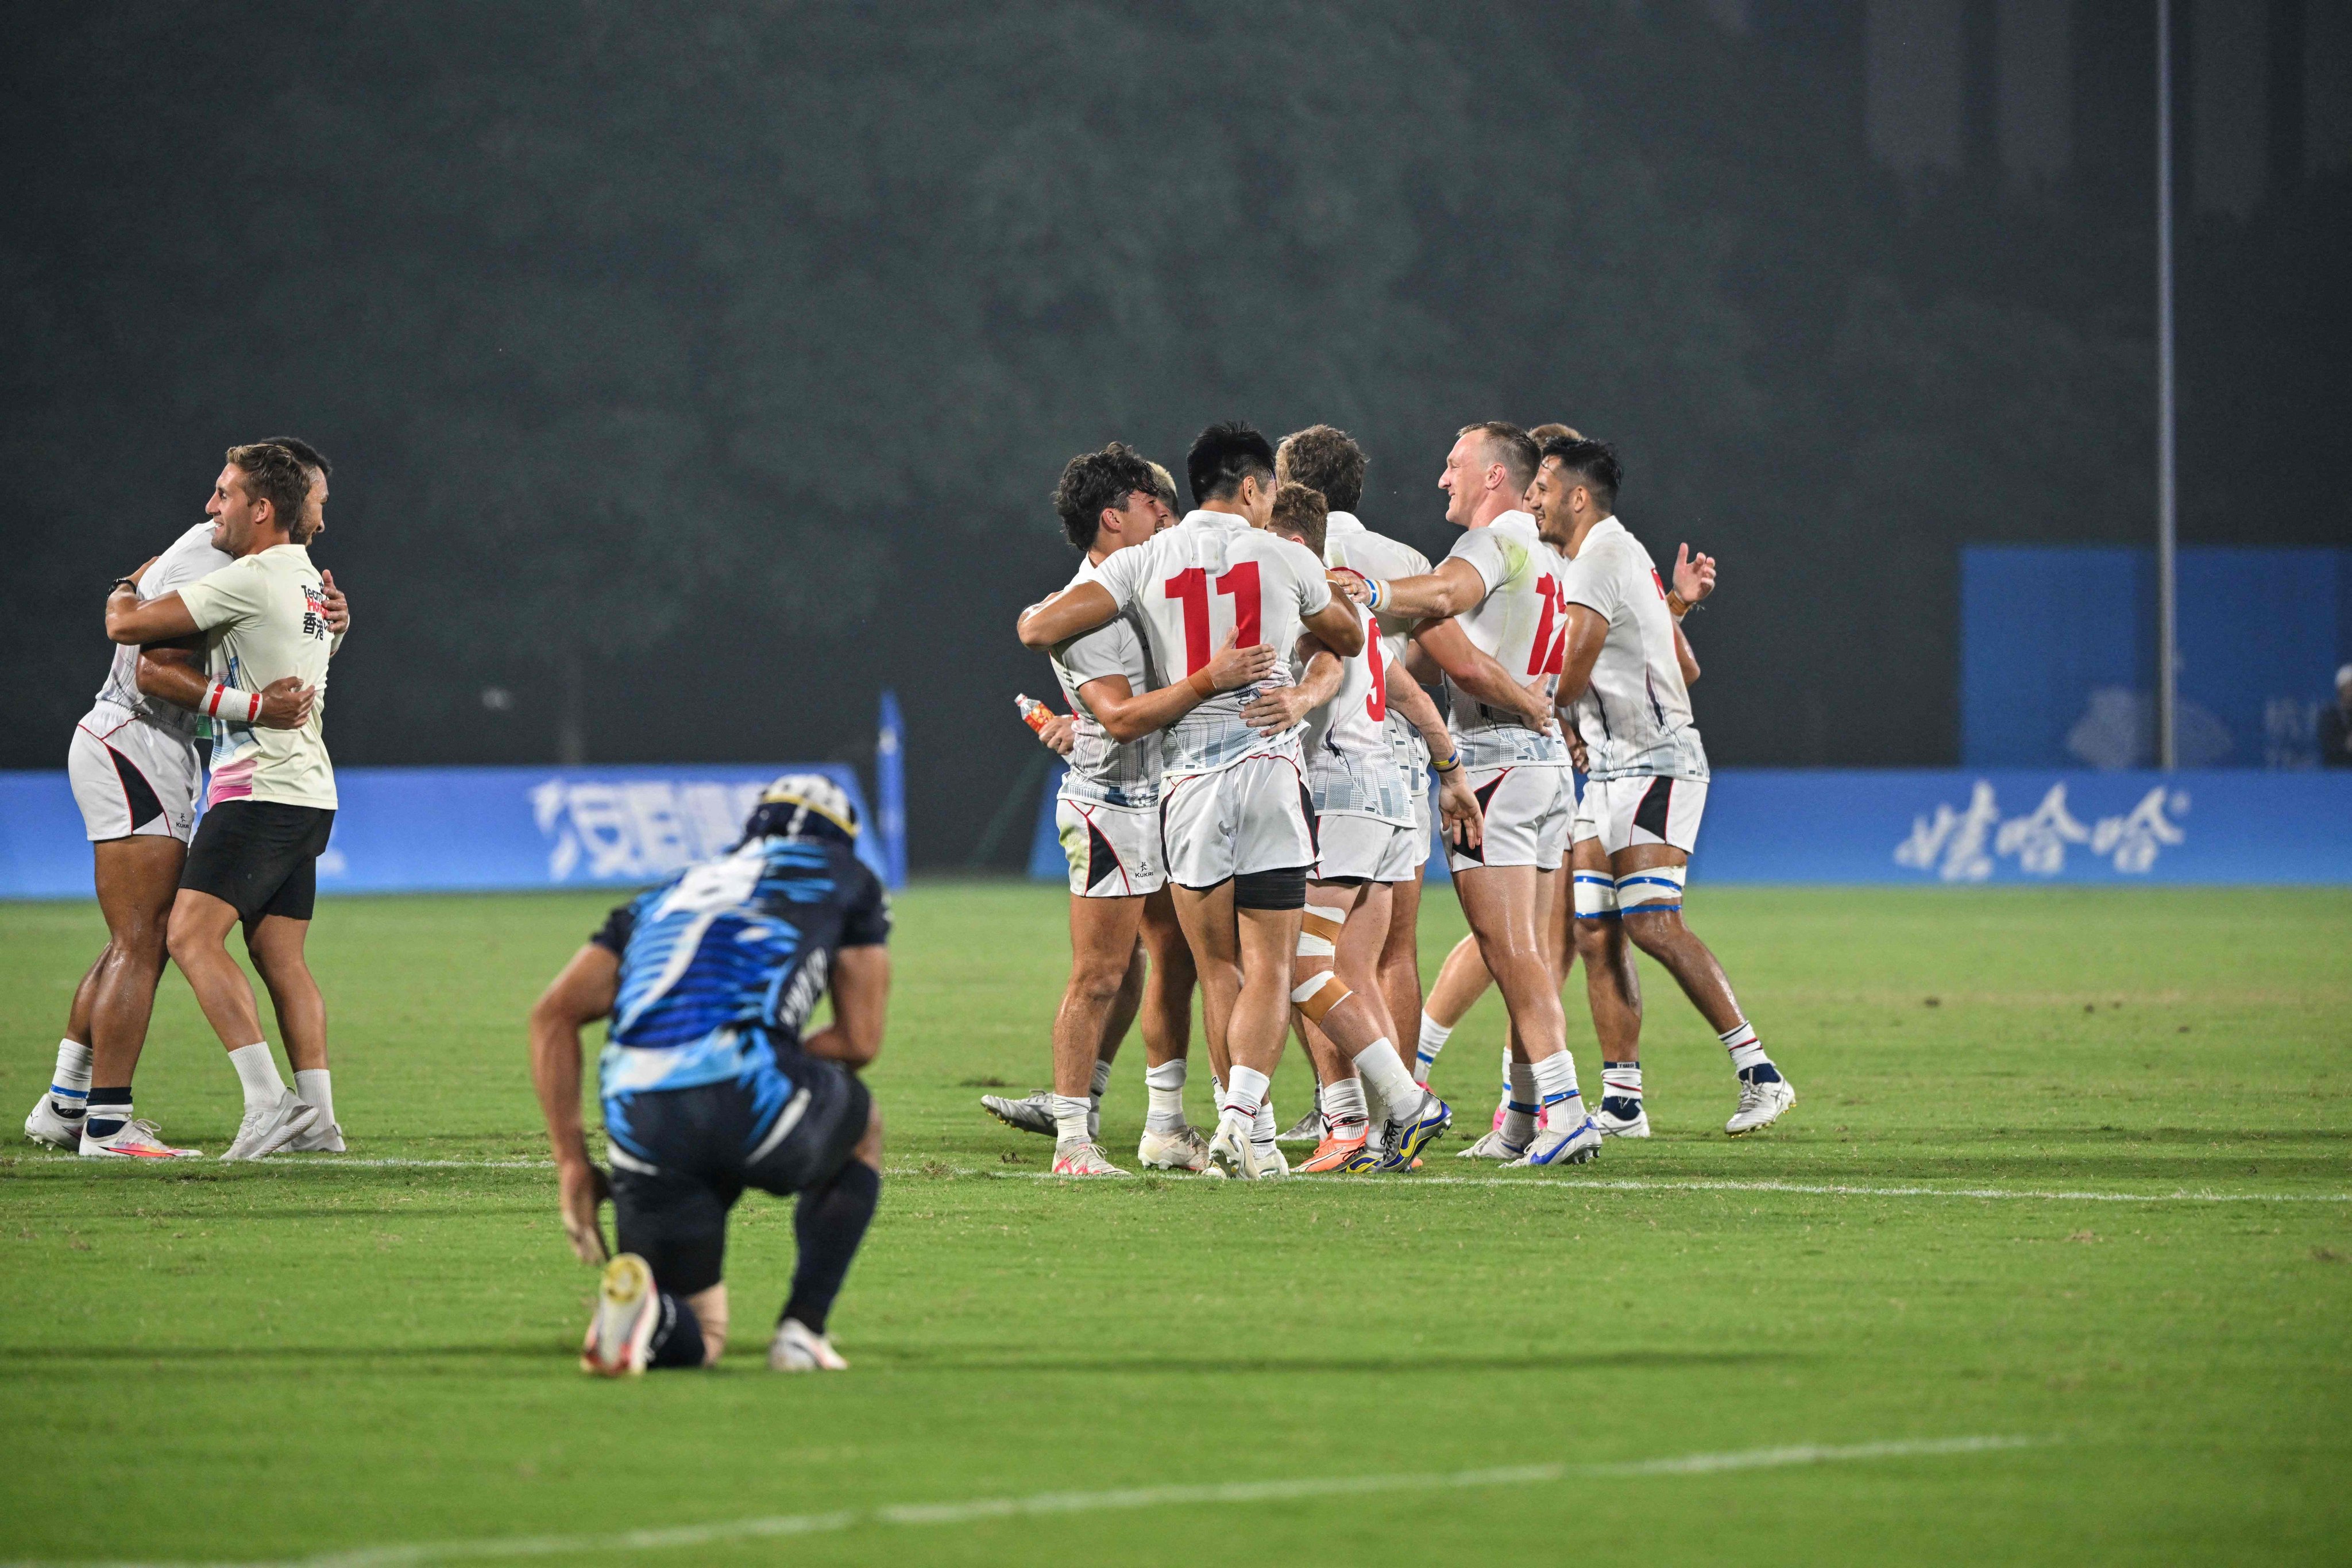 Hong Kong defended their Asian Games crown following an inspired final display from Liam Doherty. Photo: AFP